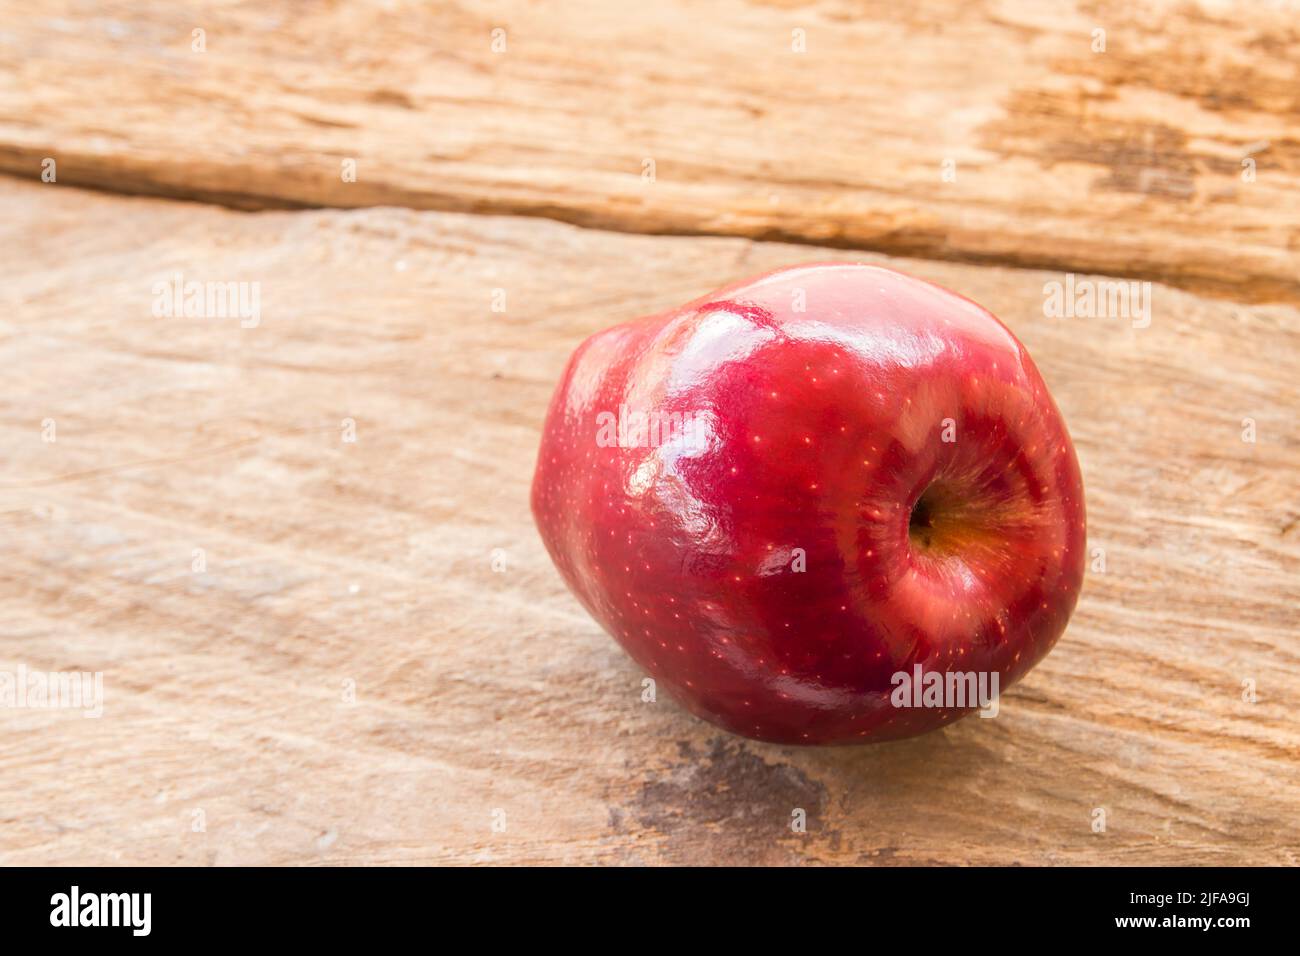 Fresh red apple on wooden table background Stock Photo